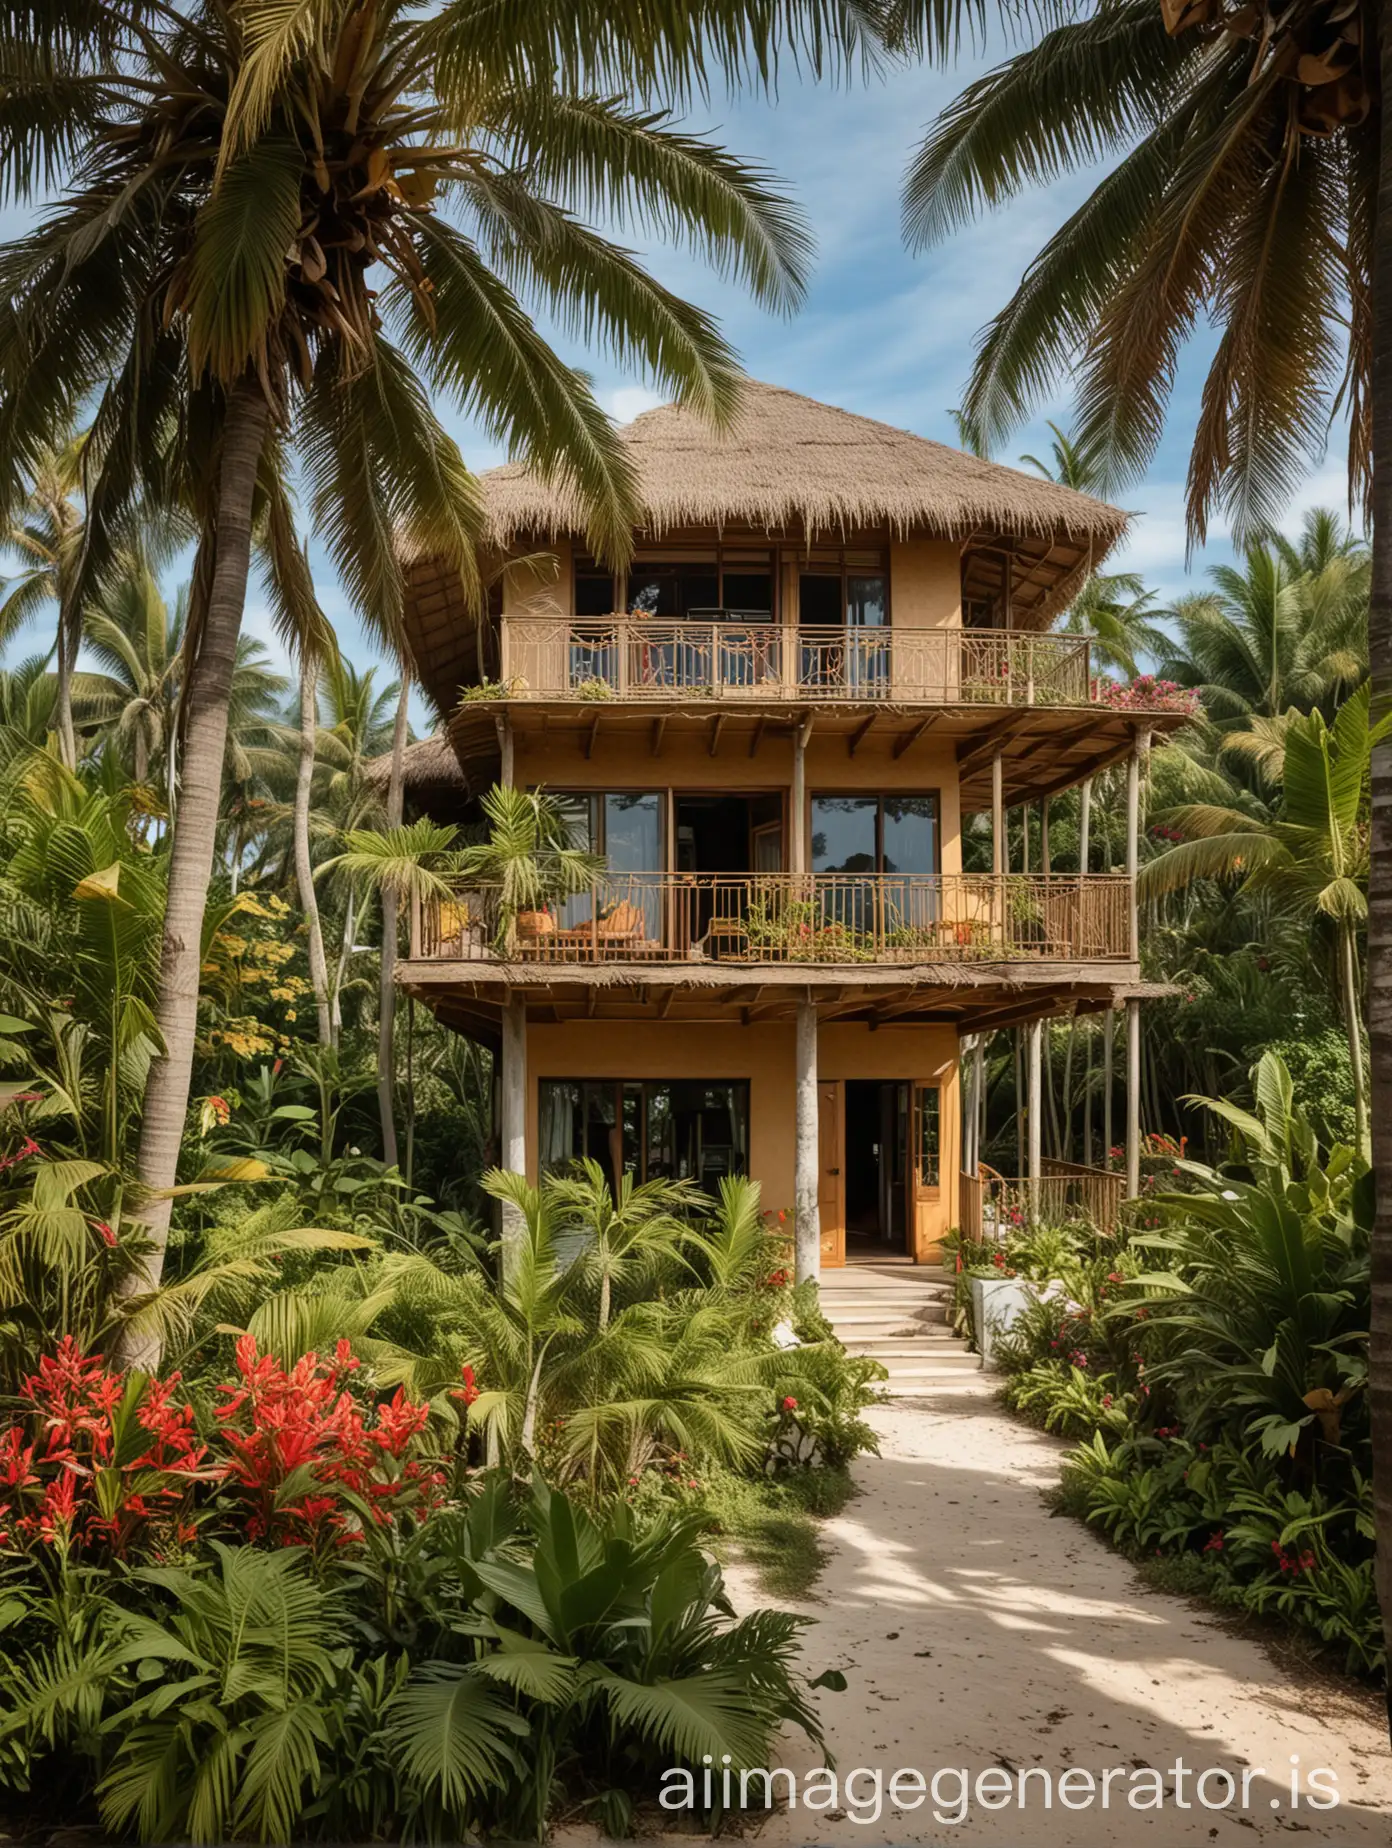 further view of a two-storeys sustainable house with coconut tropical garden, colorful plants, coconut roof, sand beach